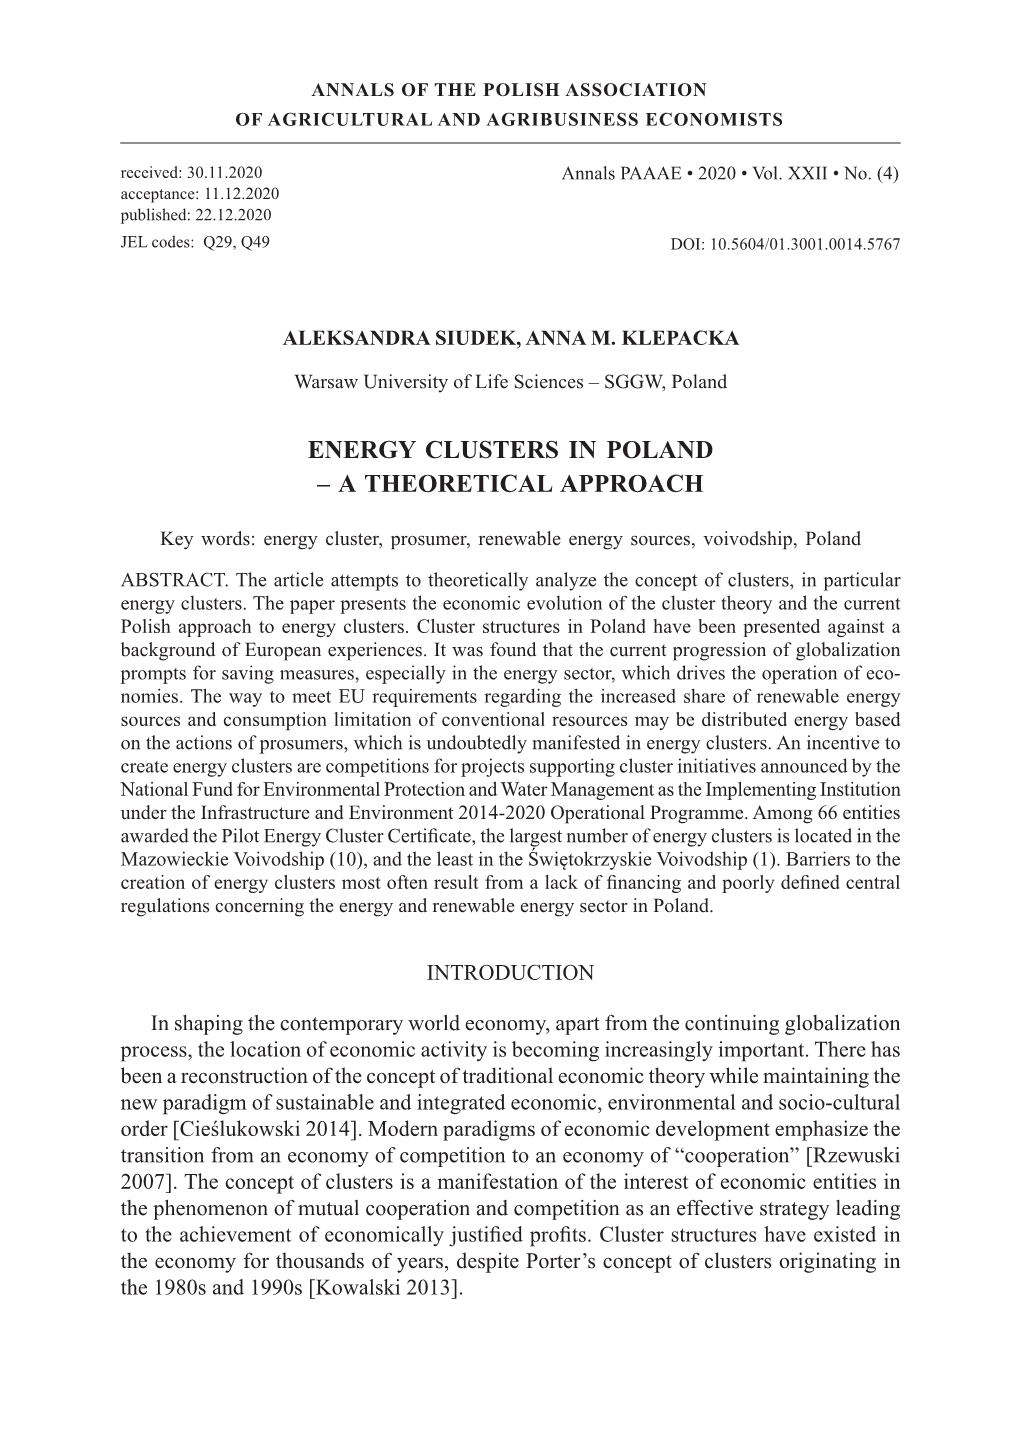 Energy Clusters in Poland – a Theoretical Approach